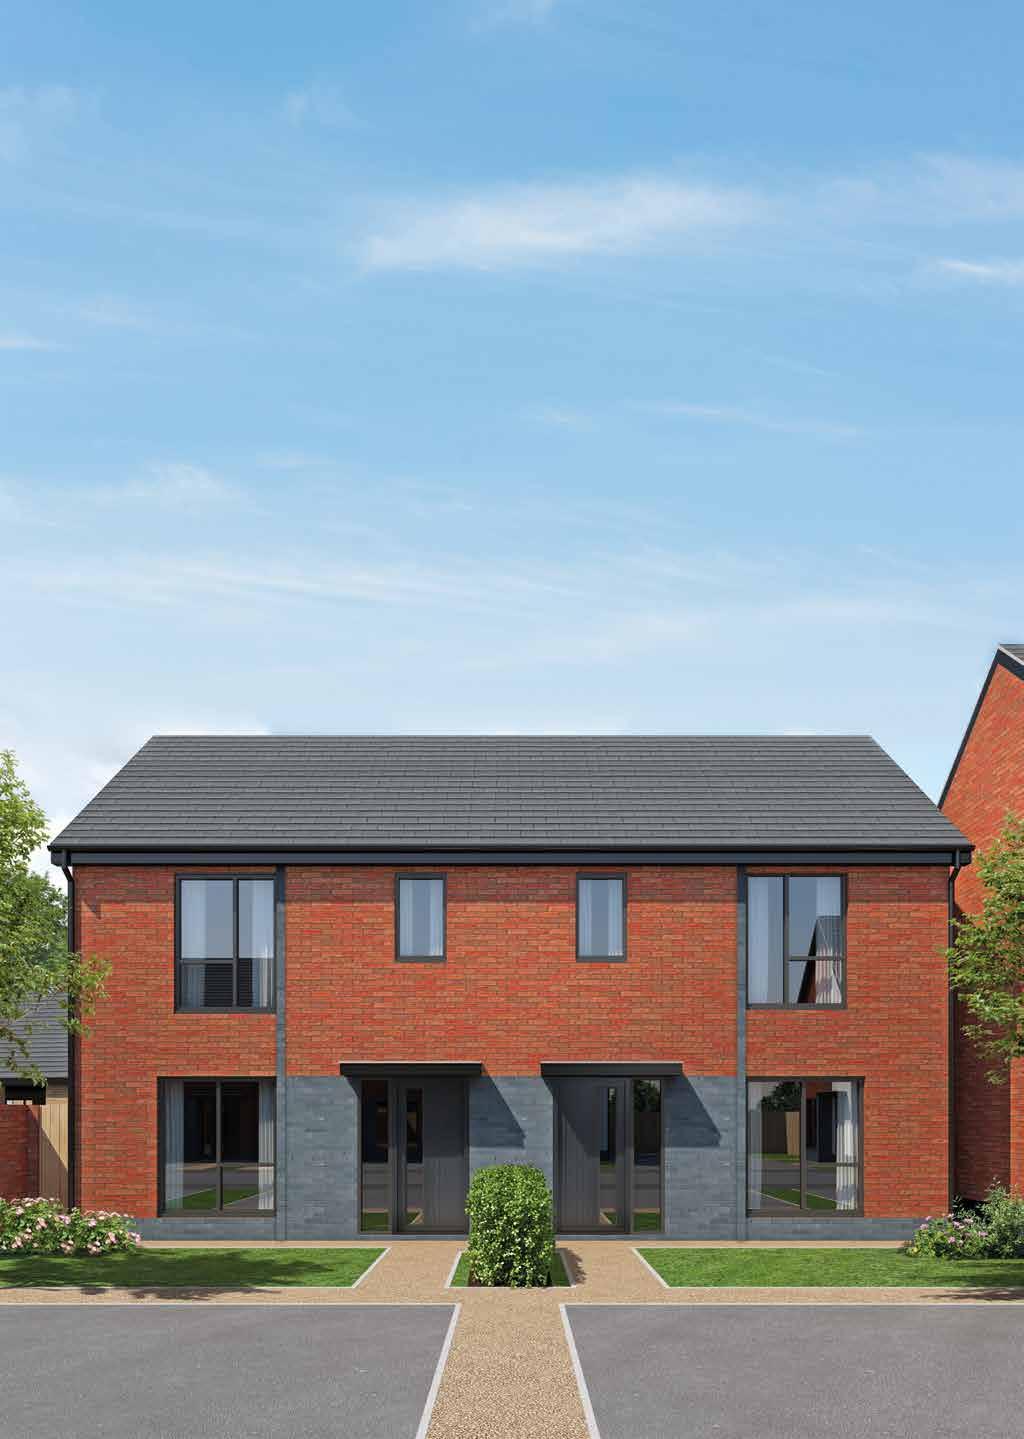 41m / 7 1 x 7 11 Grosvenor Three bedroom detached and semi-detached home part of the First Ark Group BUILT WITH YOU IN MIND T: 0151 290 7891 E: info@oriel-living.co.